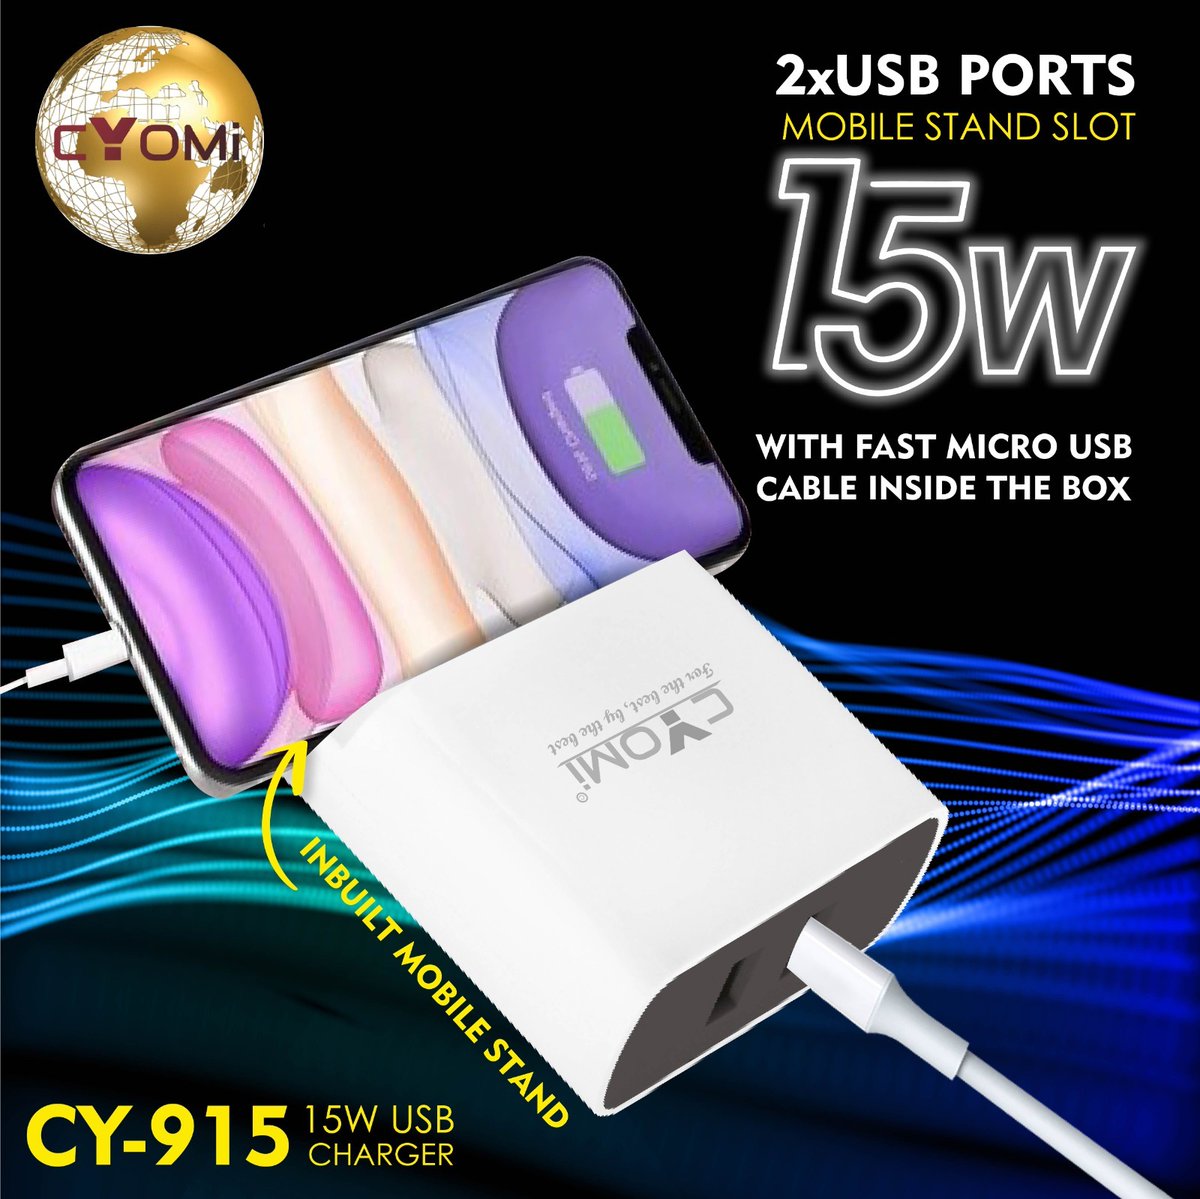 Are you ready for hassle-free charging? 
Drop a 'YES' if you're tempted by the CY-915 15W USB Charger! ✨

#Cyomi #CY915 #ChargingSimplified #TechInnovation #ConvenientCharging #GadgetLover #SmartTech #USBCharger #PowerUp